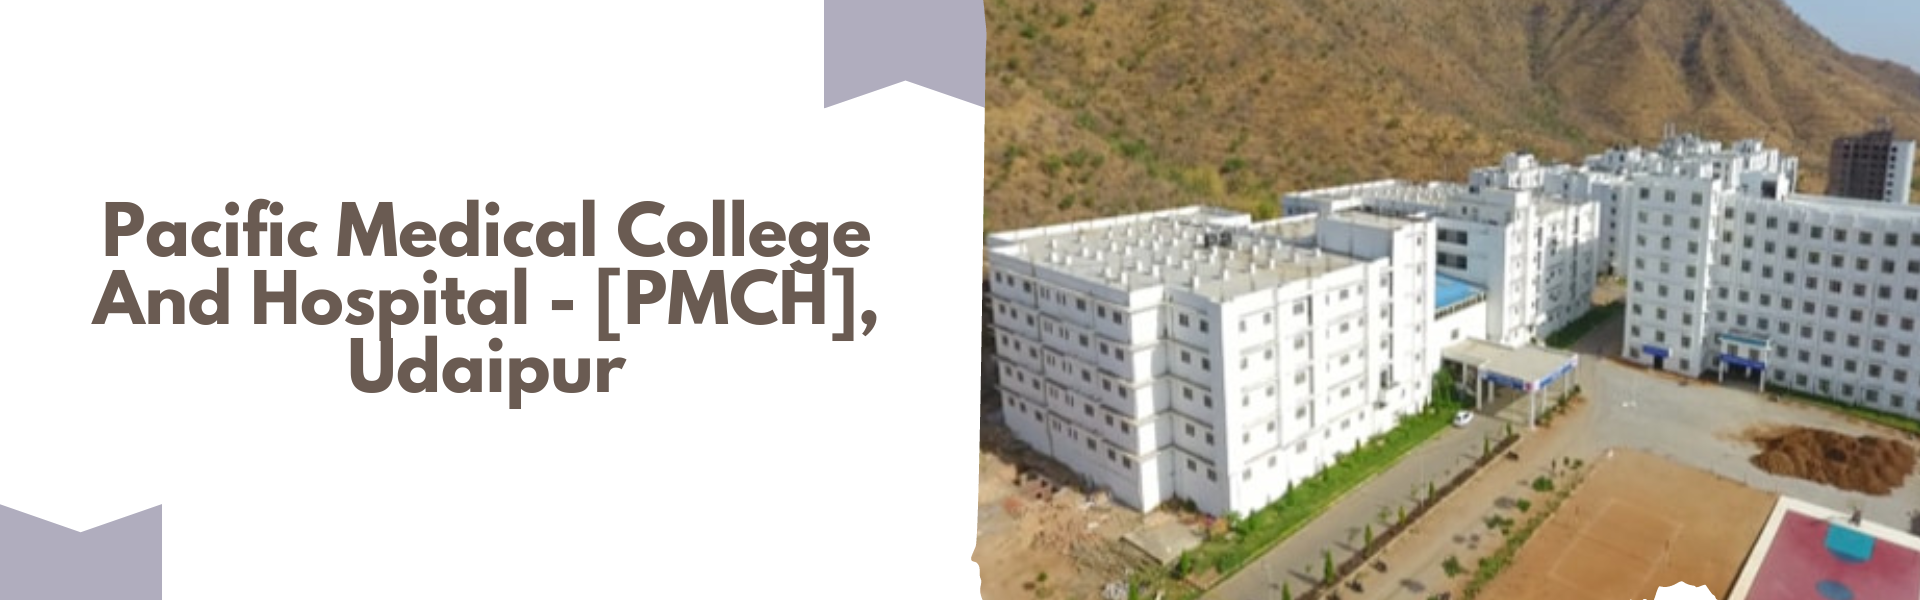 Pacific Medical College And Hospital - [PMCH], Udaipur